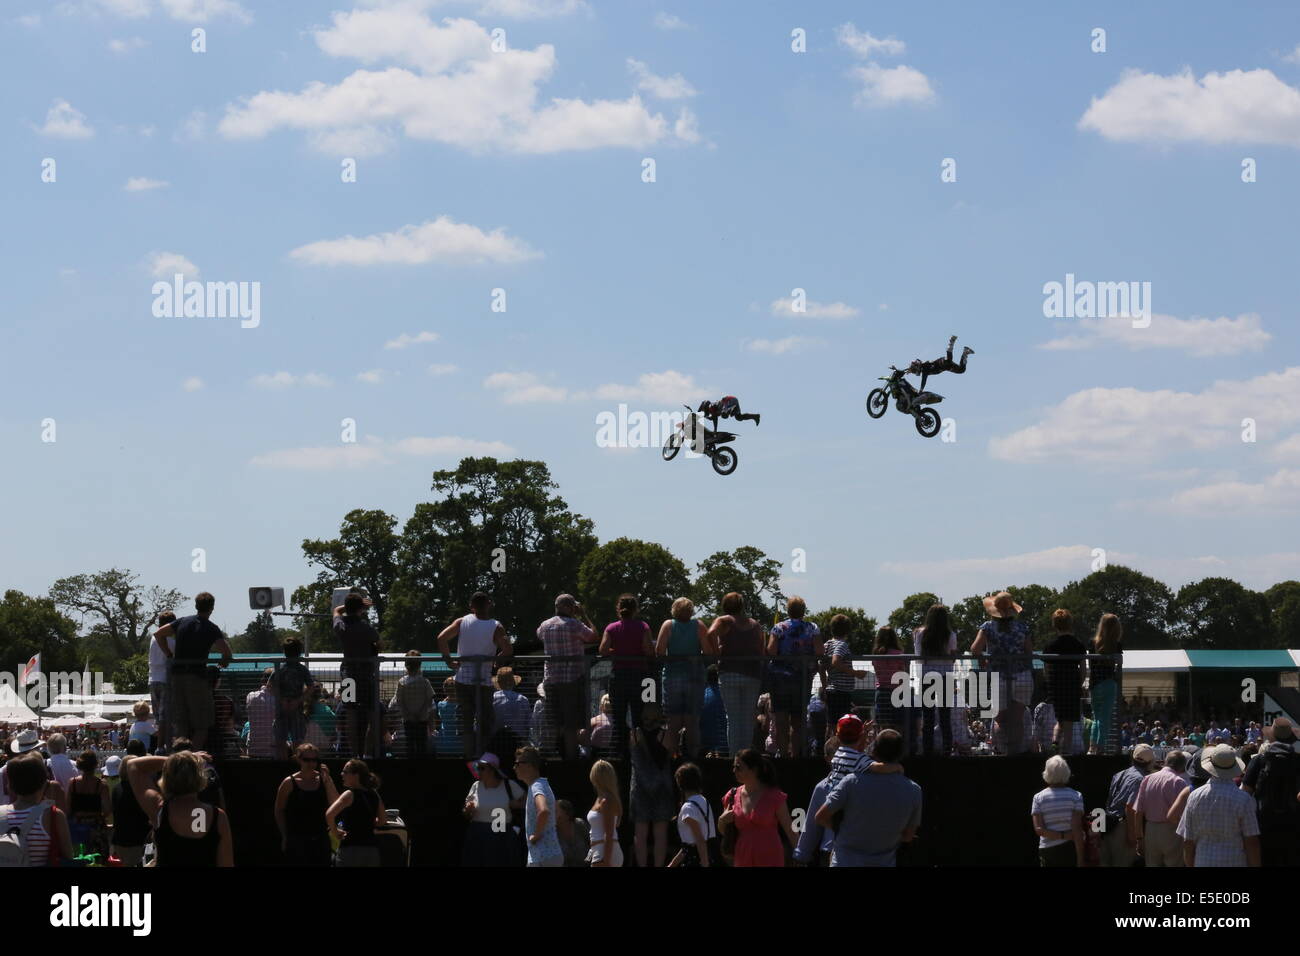 Stunt motorcyclists astonish the crowds on day one of the New Forest Show, Hampshire, UK. Stock Photo